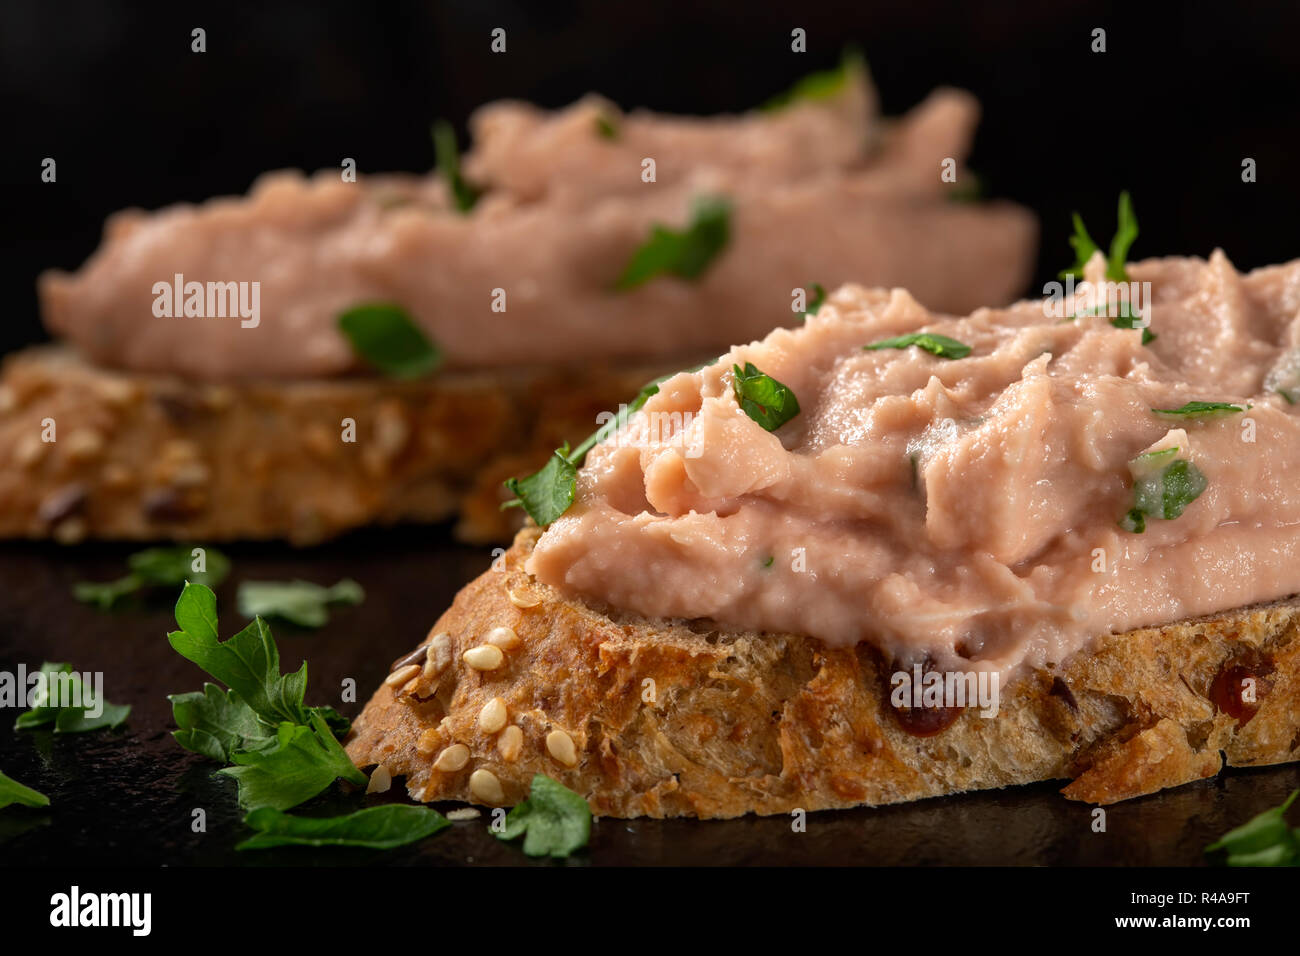 Two slices of bread with vegetable pate and chopped green parsley on a dark slate - close up view Stock Photo